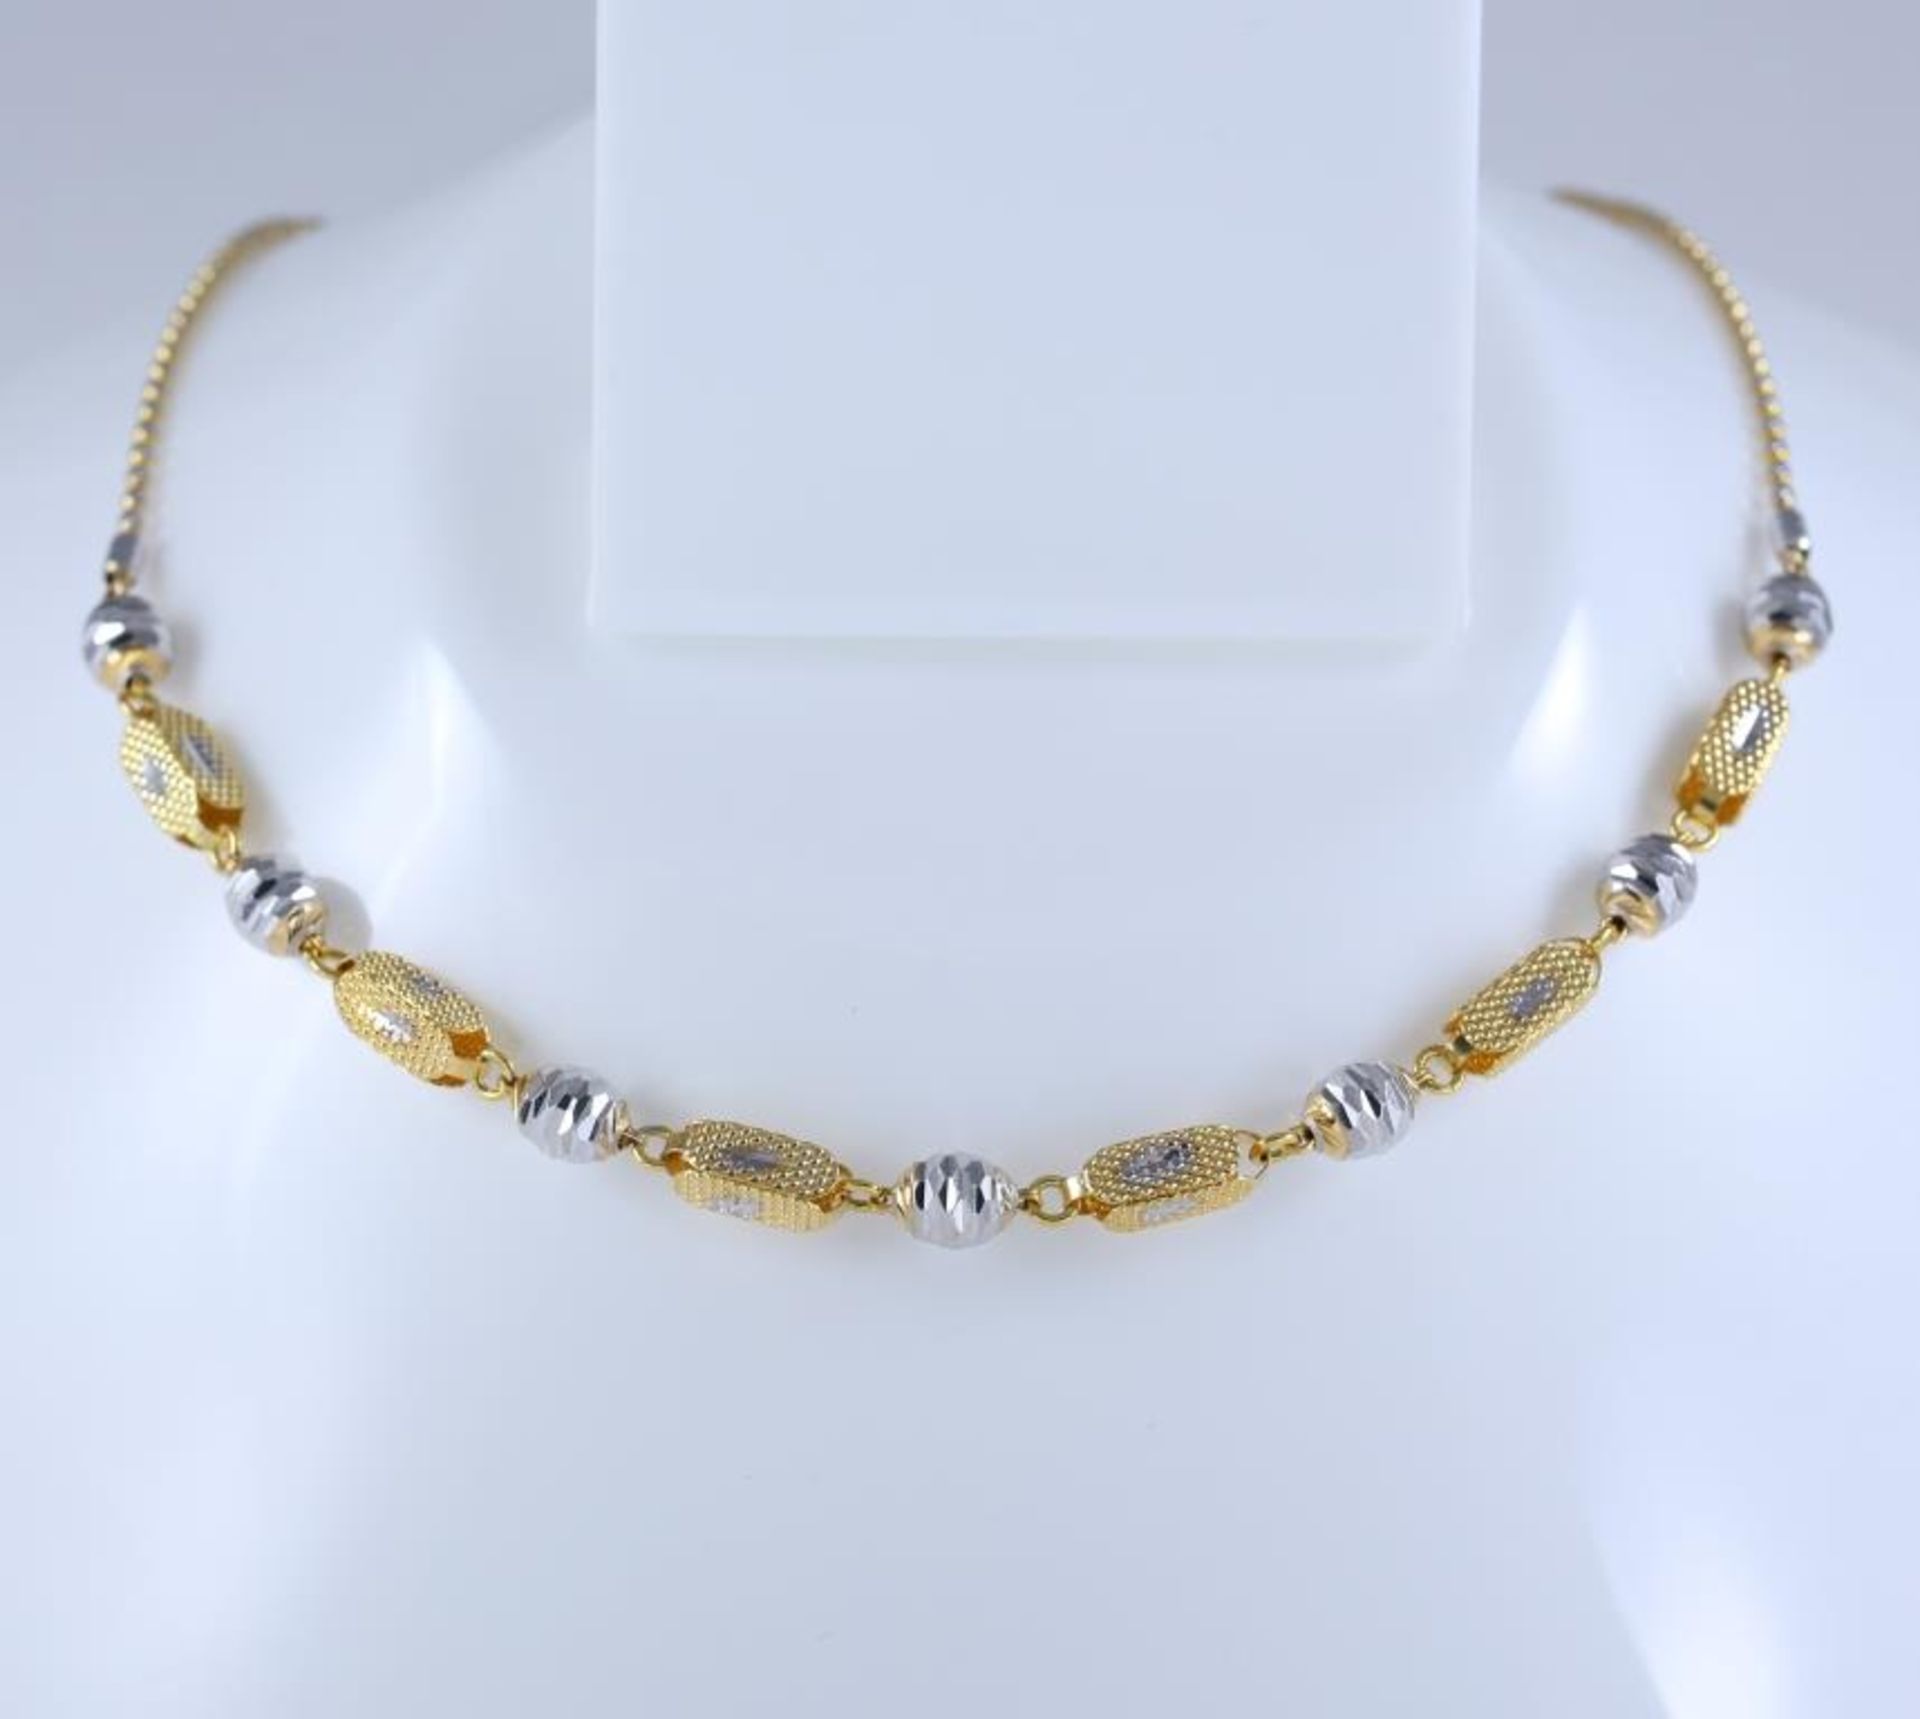 18 K / 750 Hallmarked Yellow and White Gold Chain Necklace - Image 3 of 4